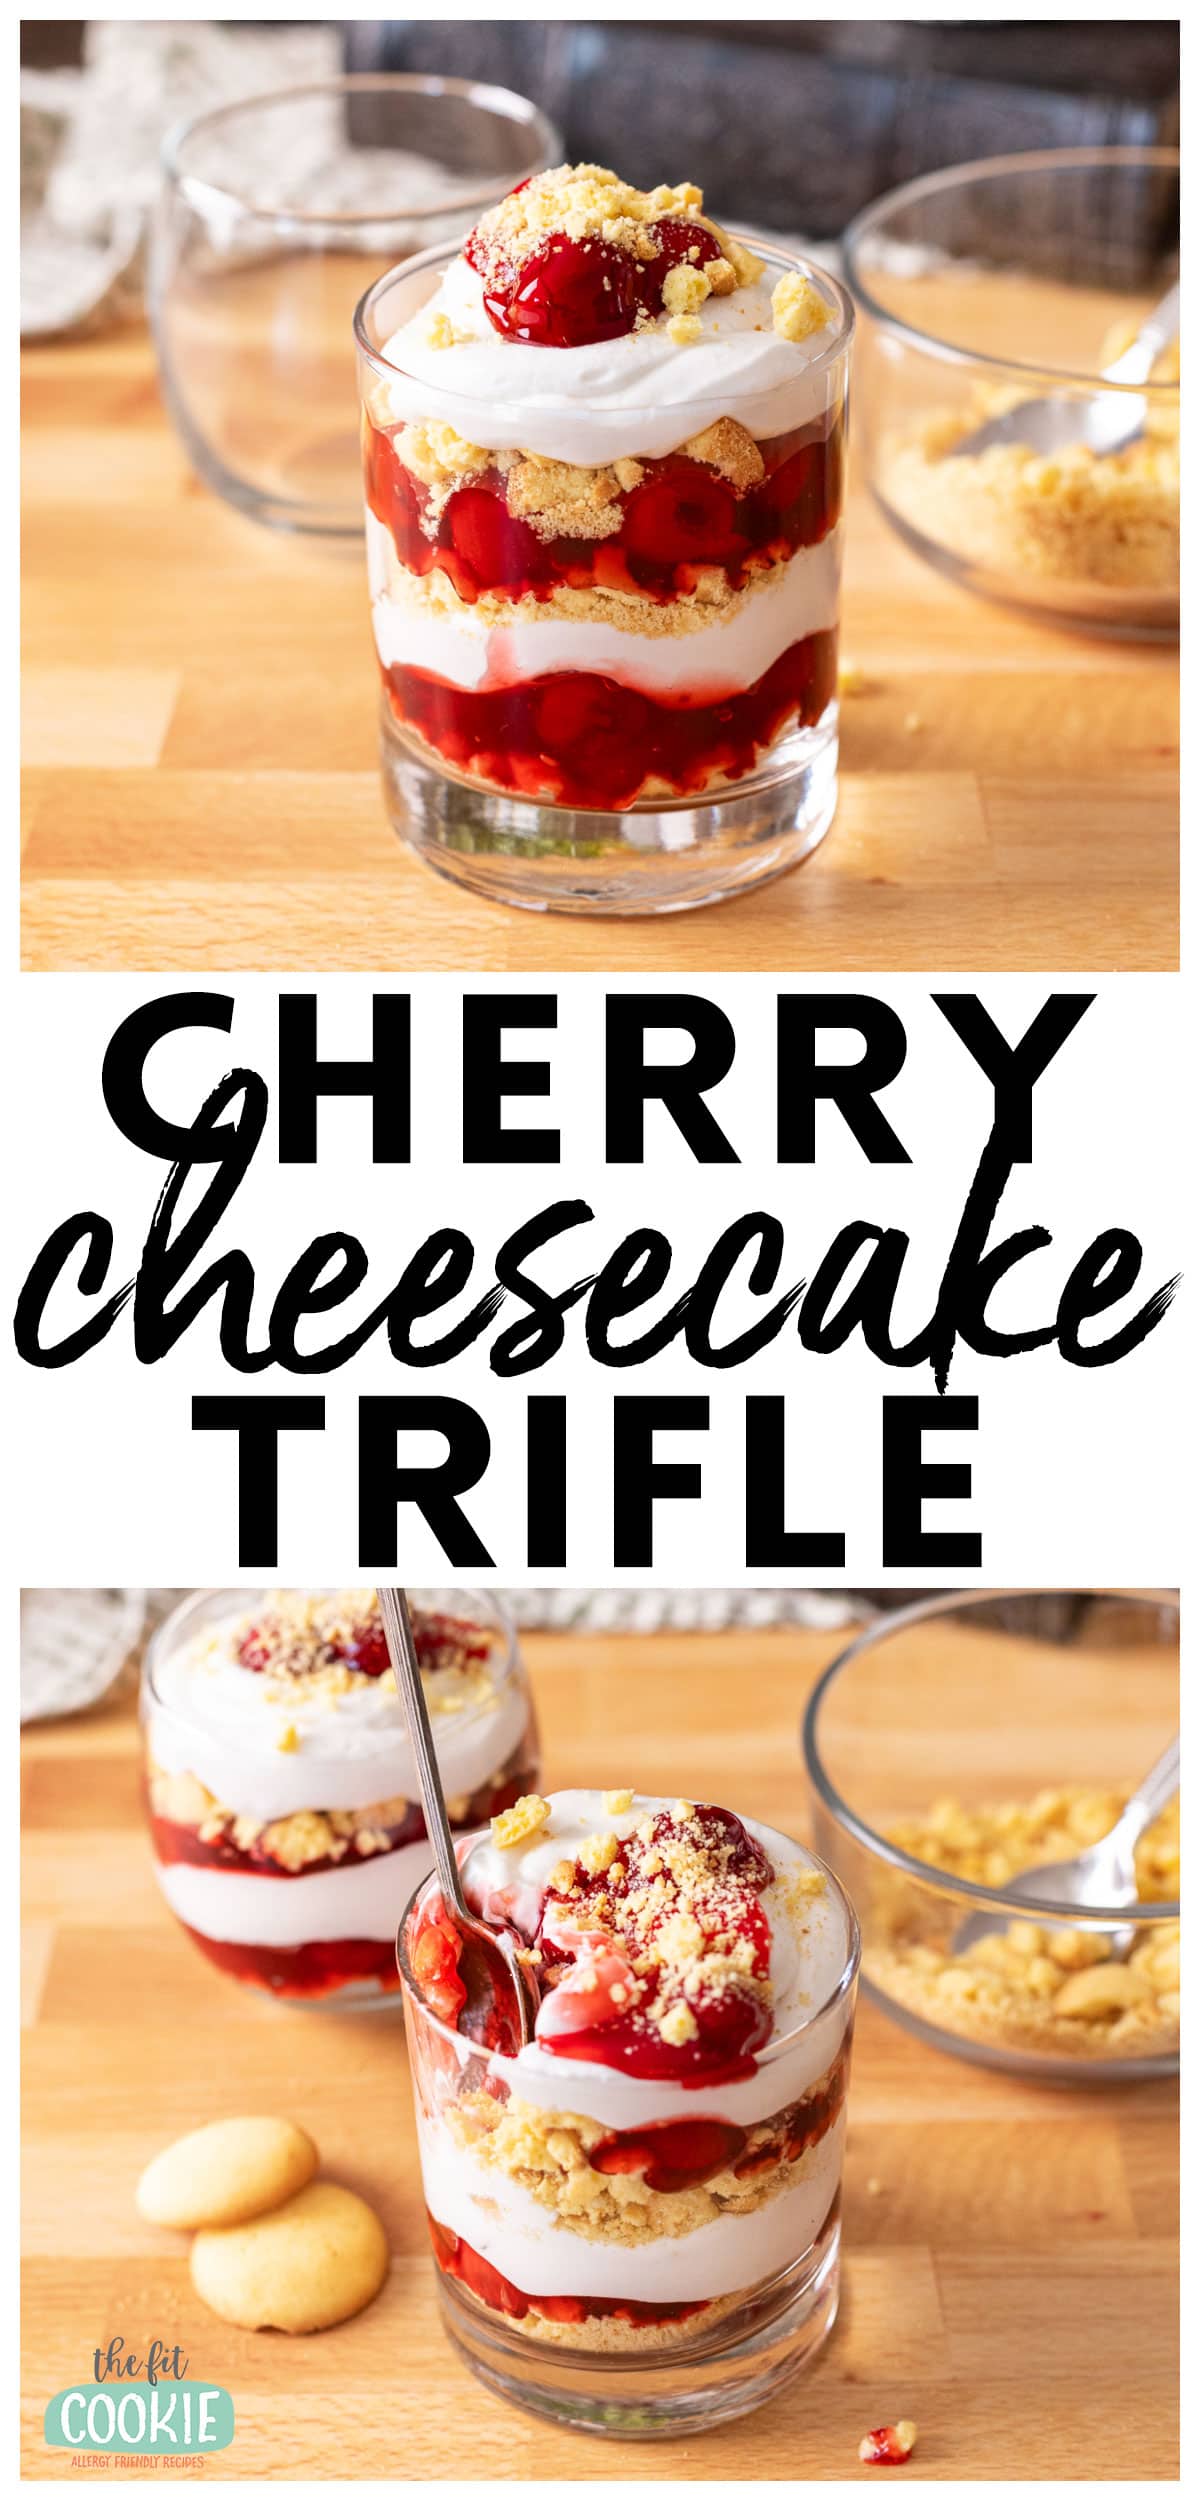 Photo collage showing no bake cheesecake dessert layered with cherries and gluten free cookie crumbs.